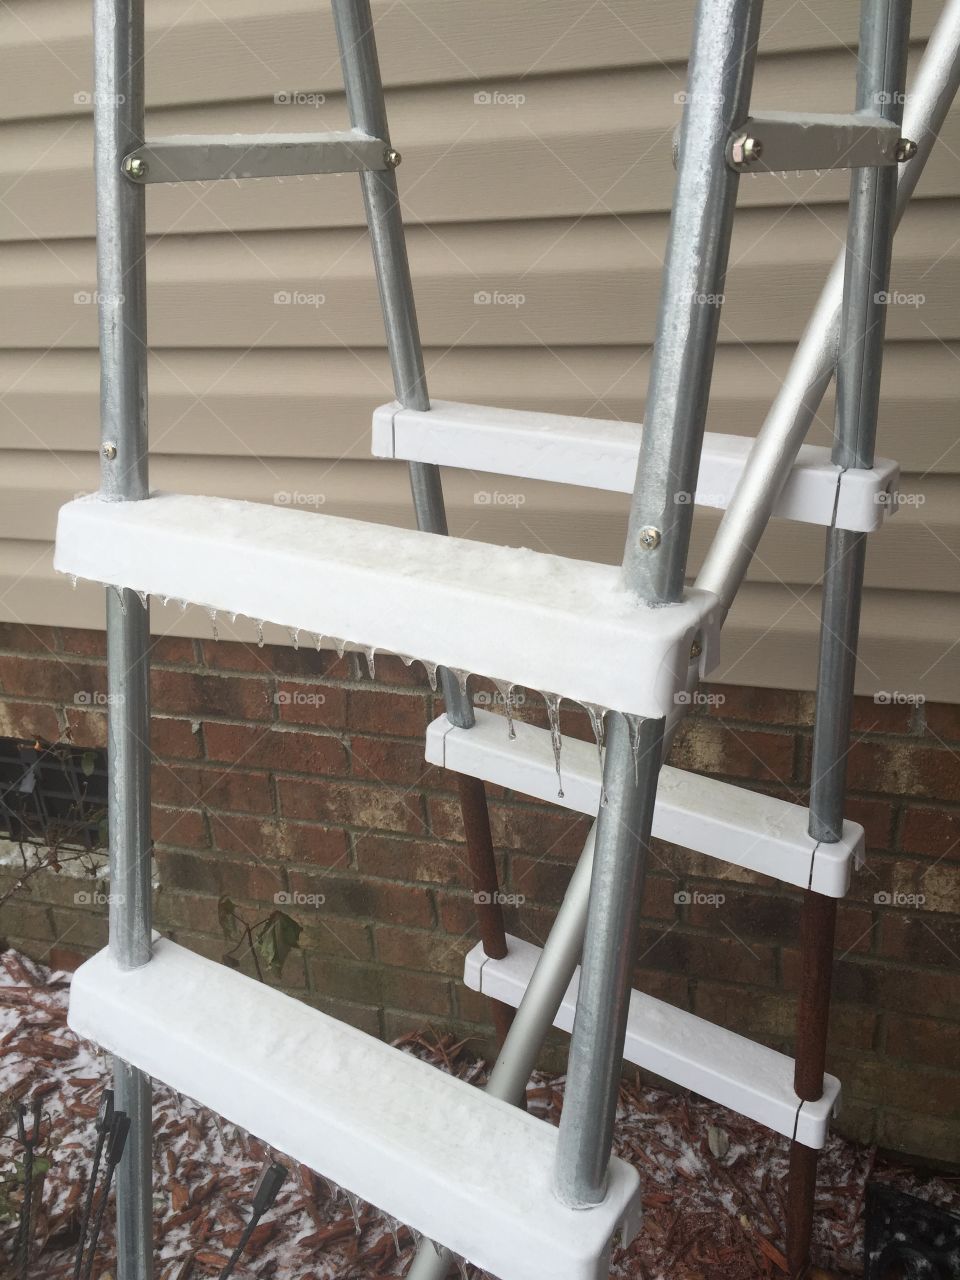 Pool ladder with ice